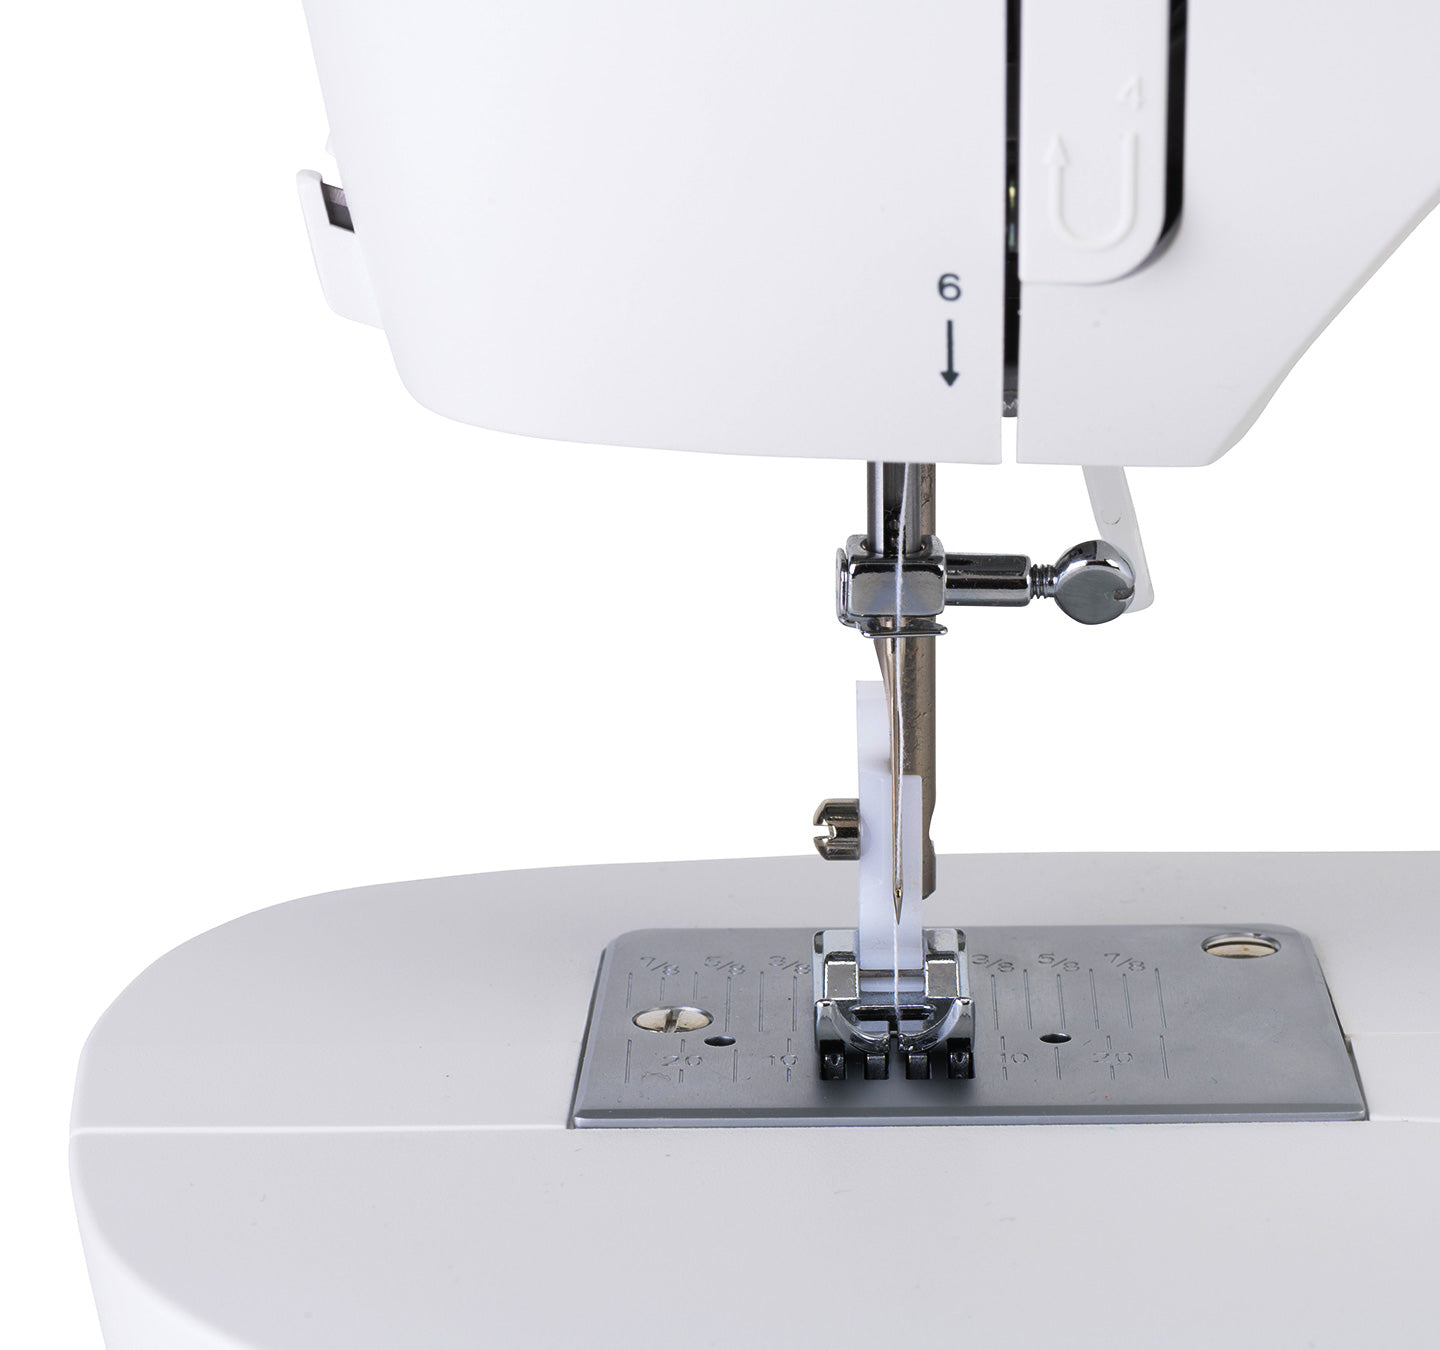 Singer MasterStitch 16-05 Sewing Machine - Ex Display - B grade - may show signs of use / cosmetic marks